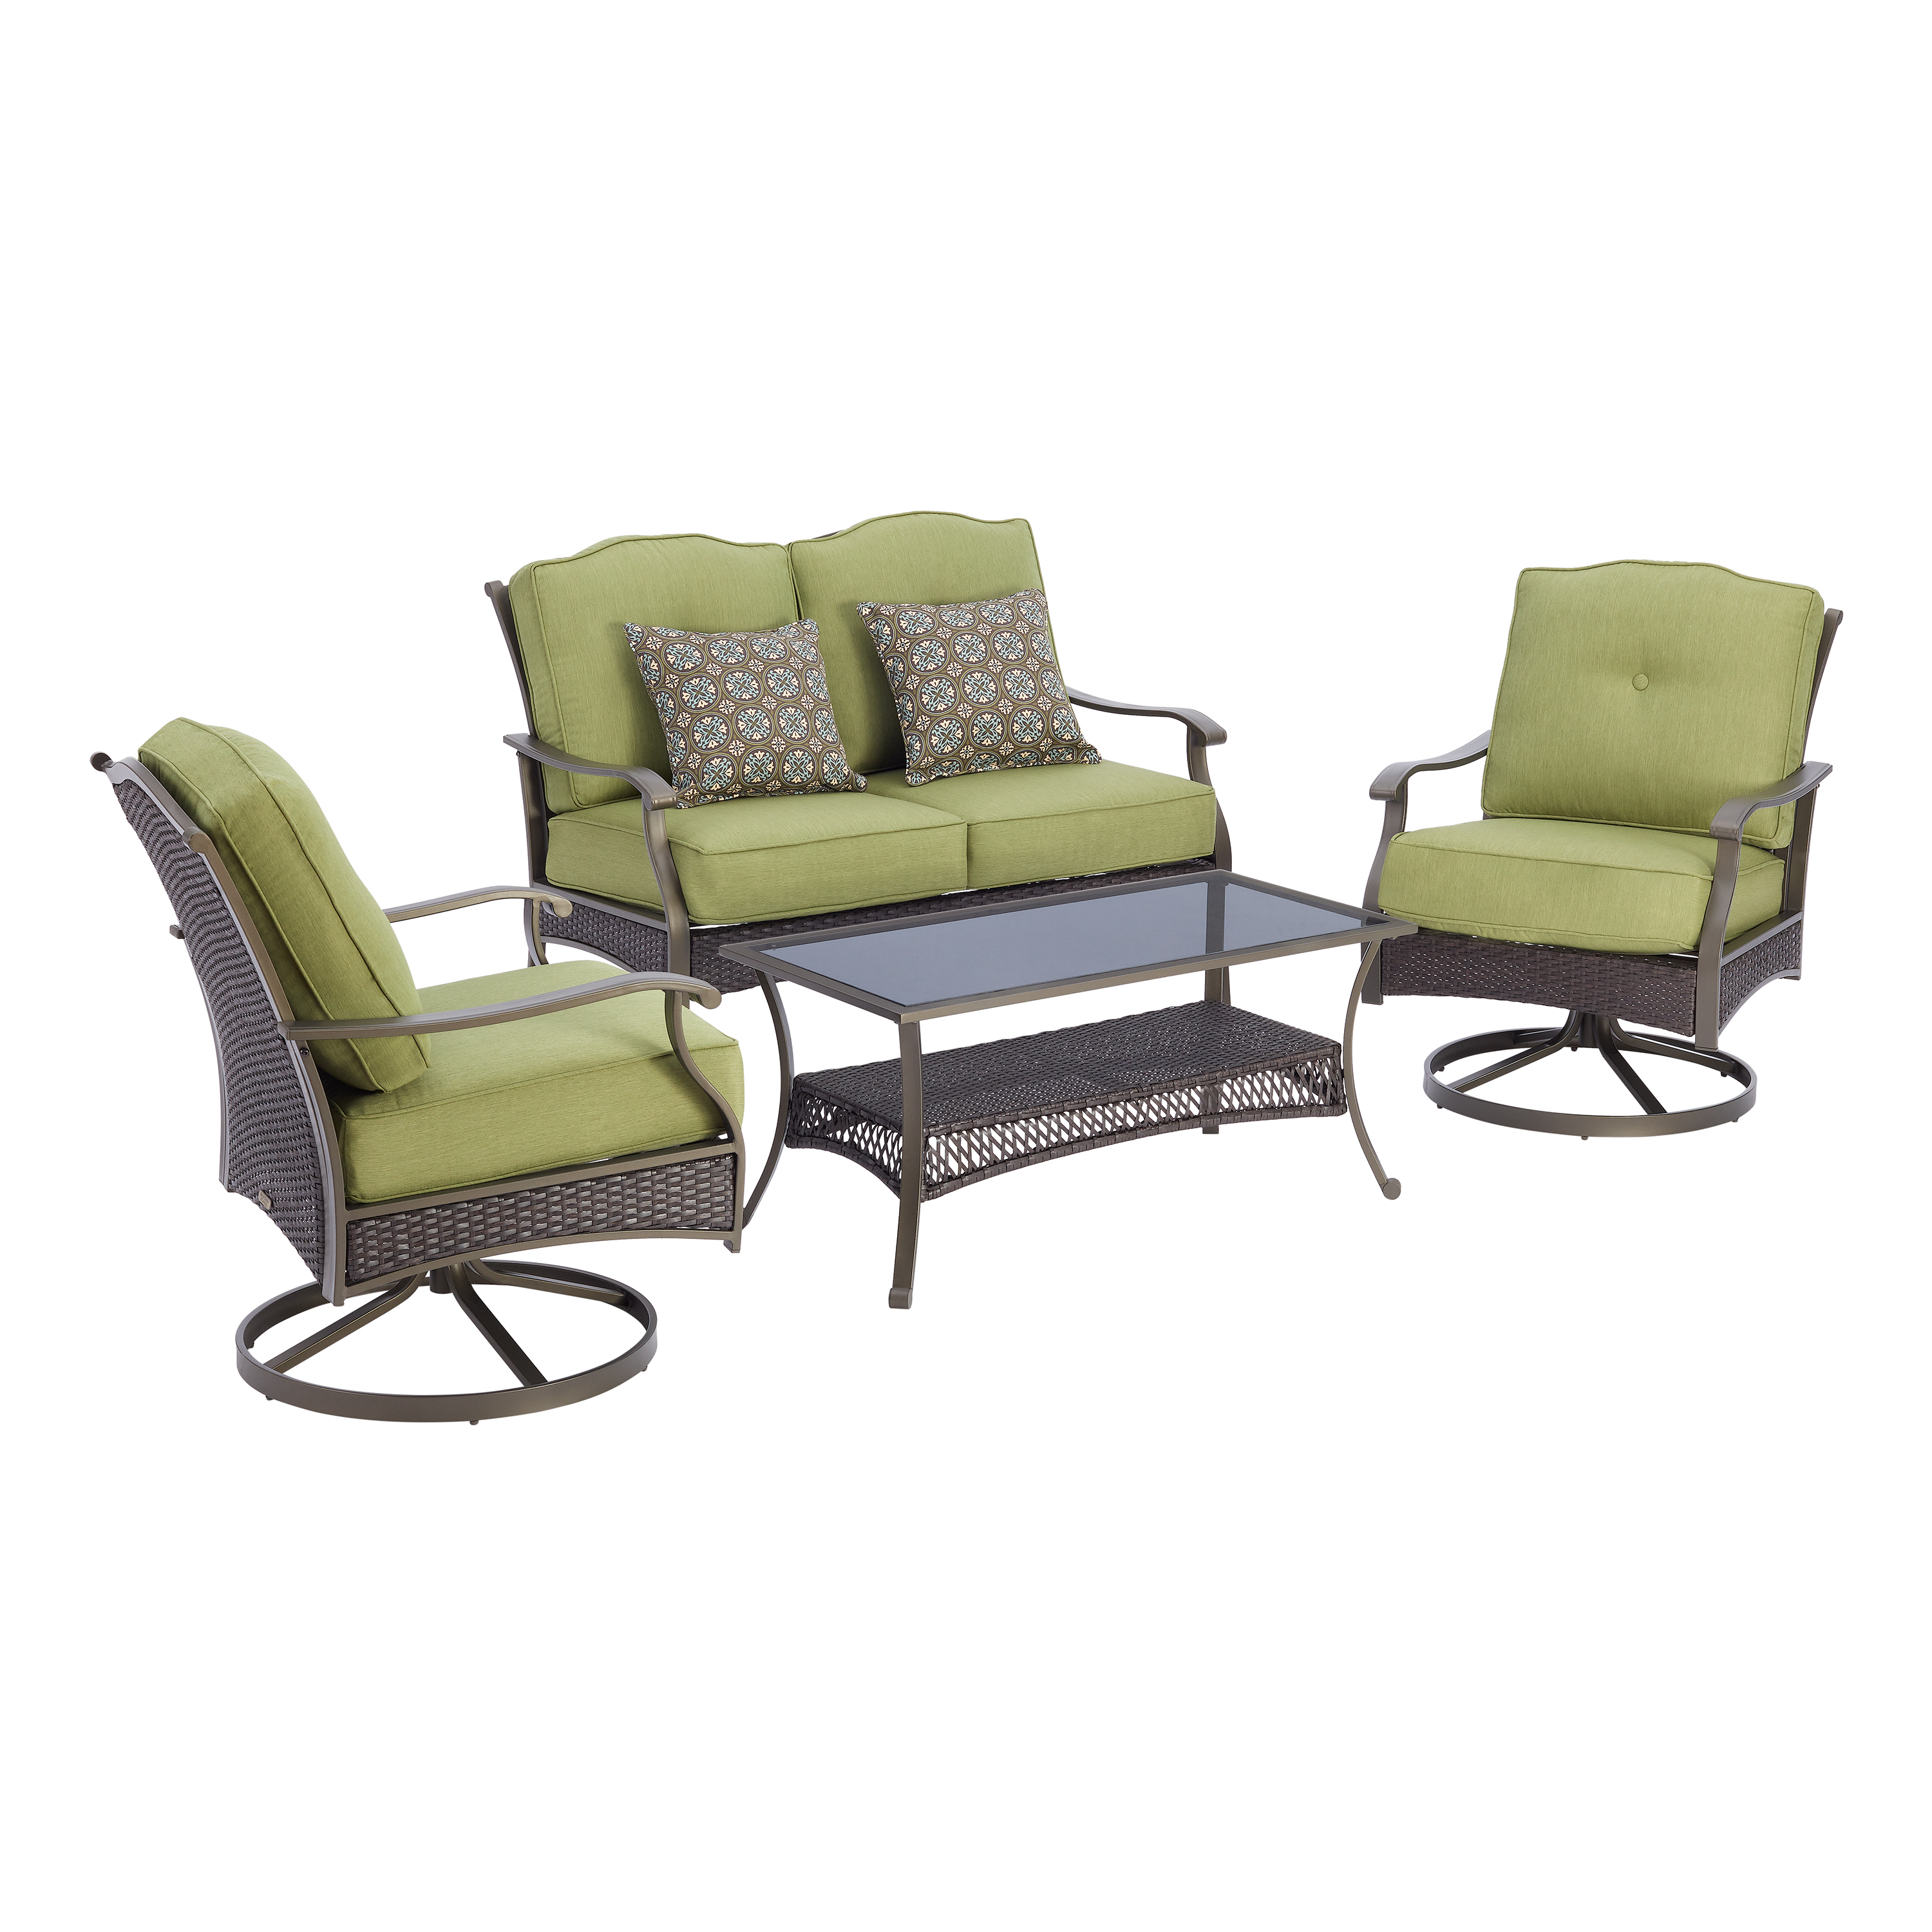 Better Homes & Gardens Providence 4-Piece Patio Conversation Set, Green - image 1 of 7